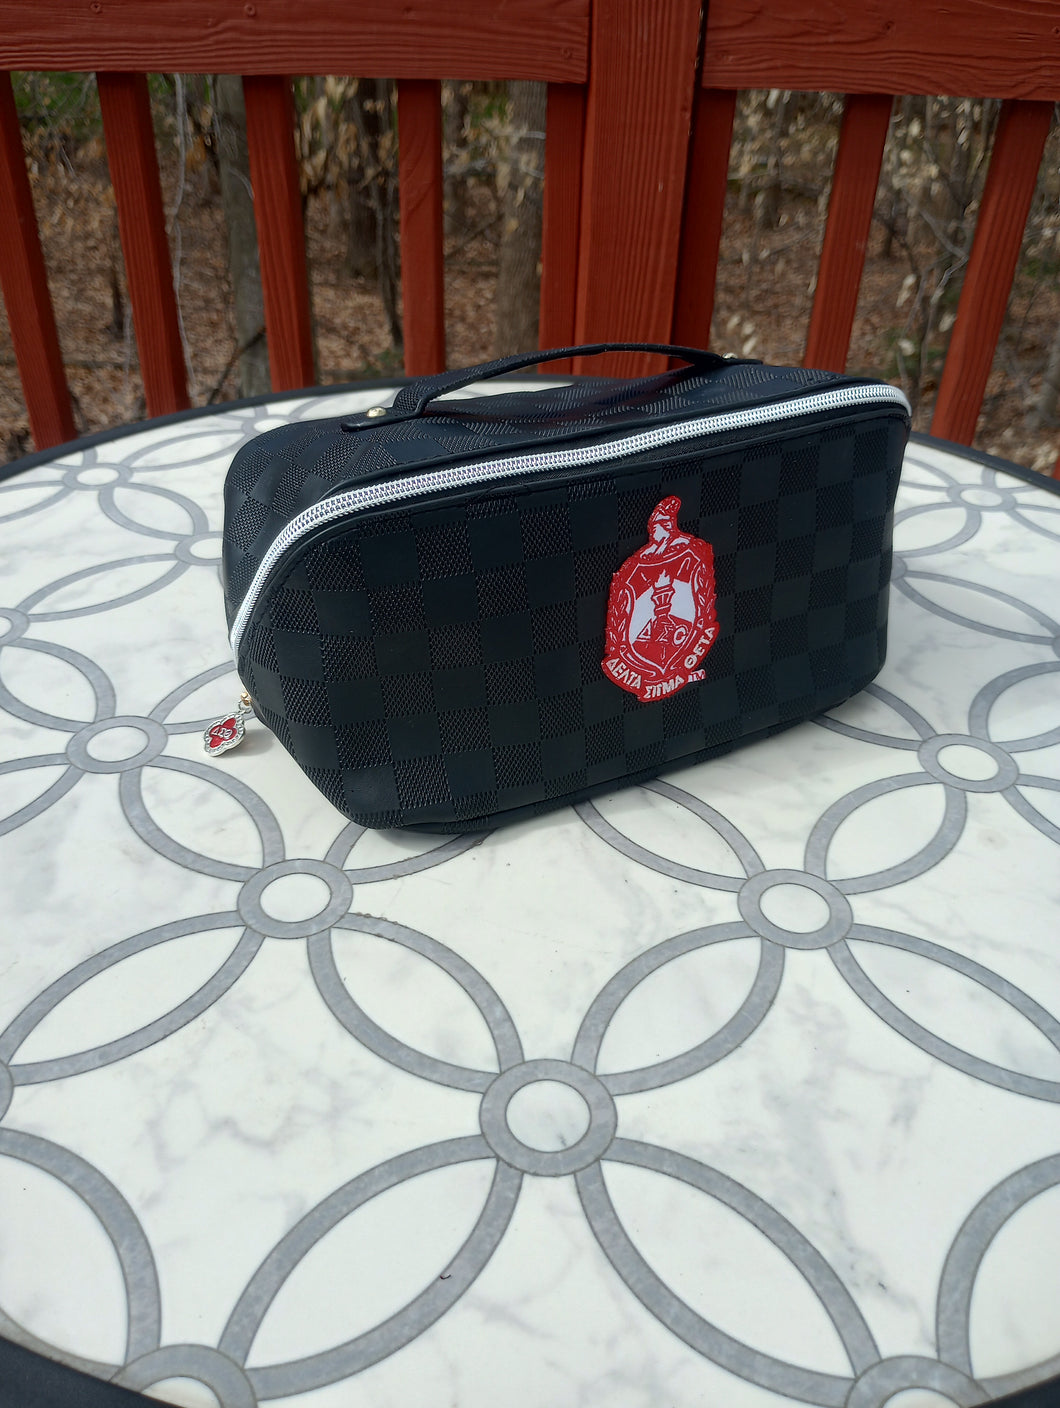 Large Capacity Black Makeup Bag with DST Crest and Charm